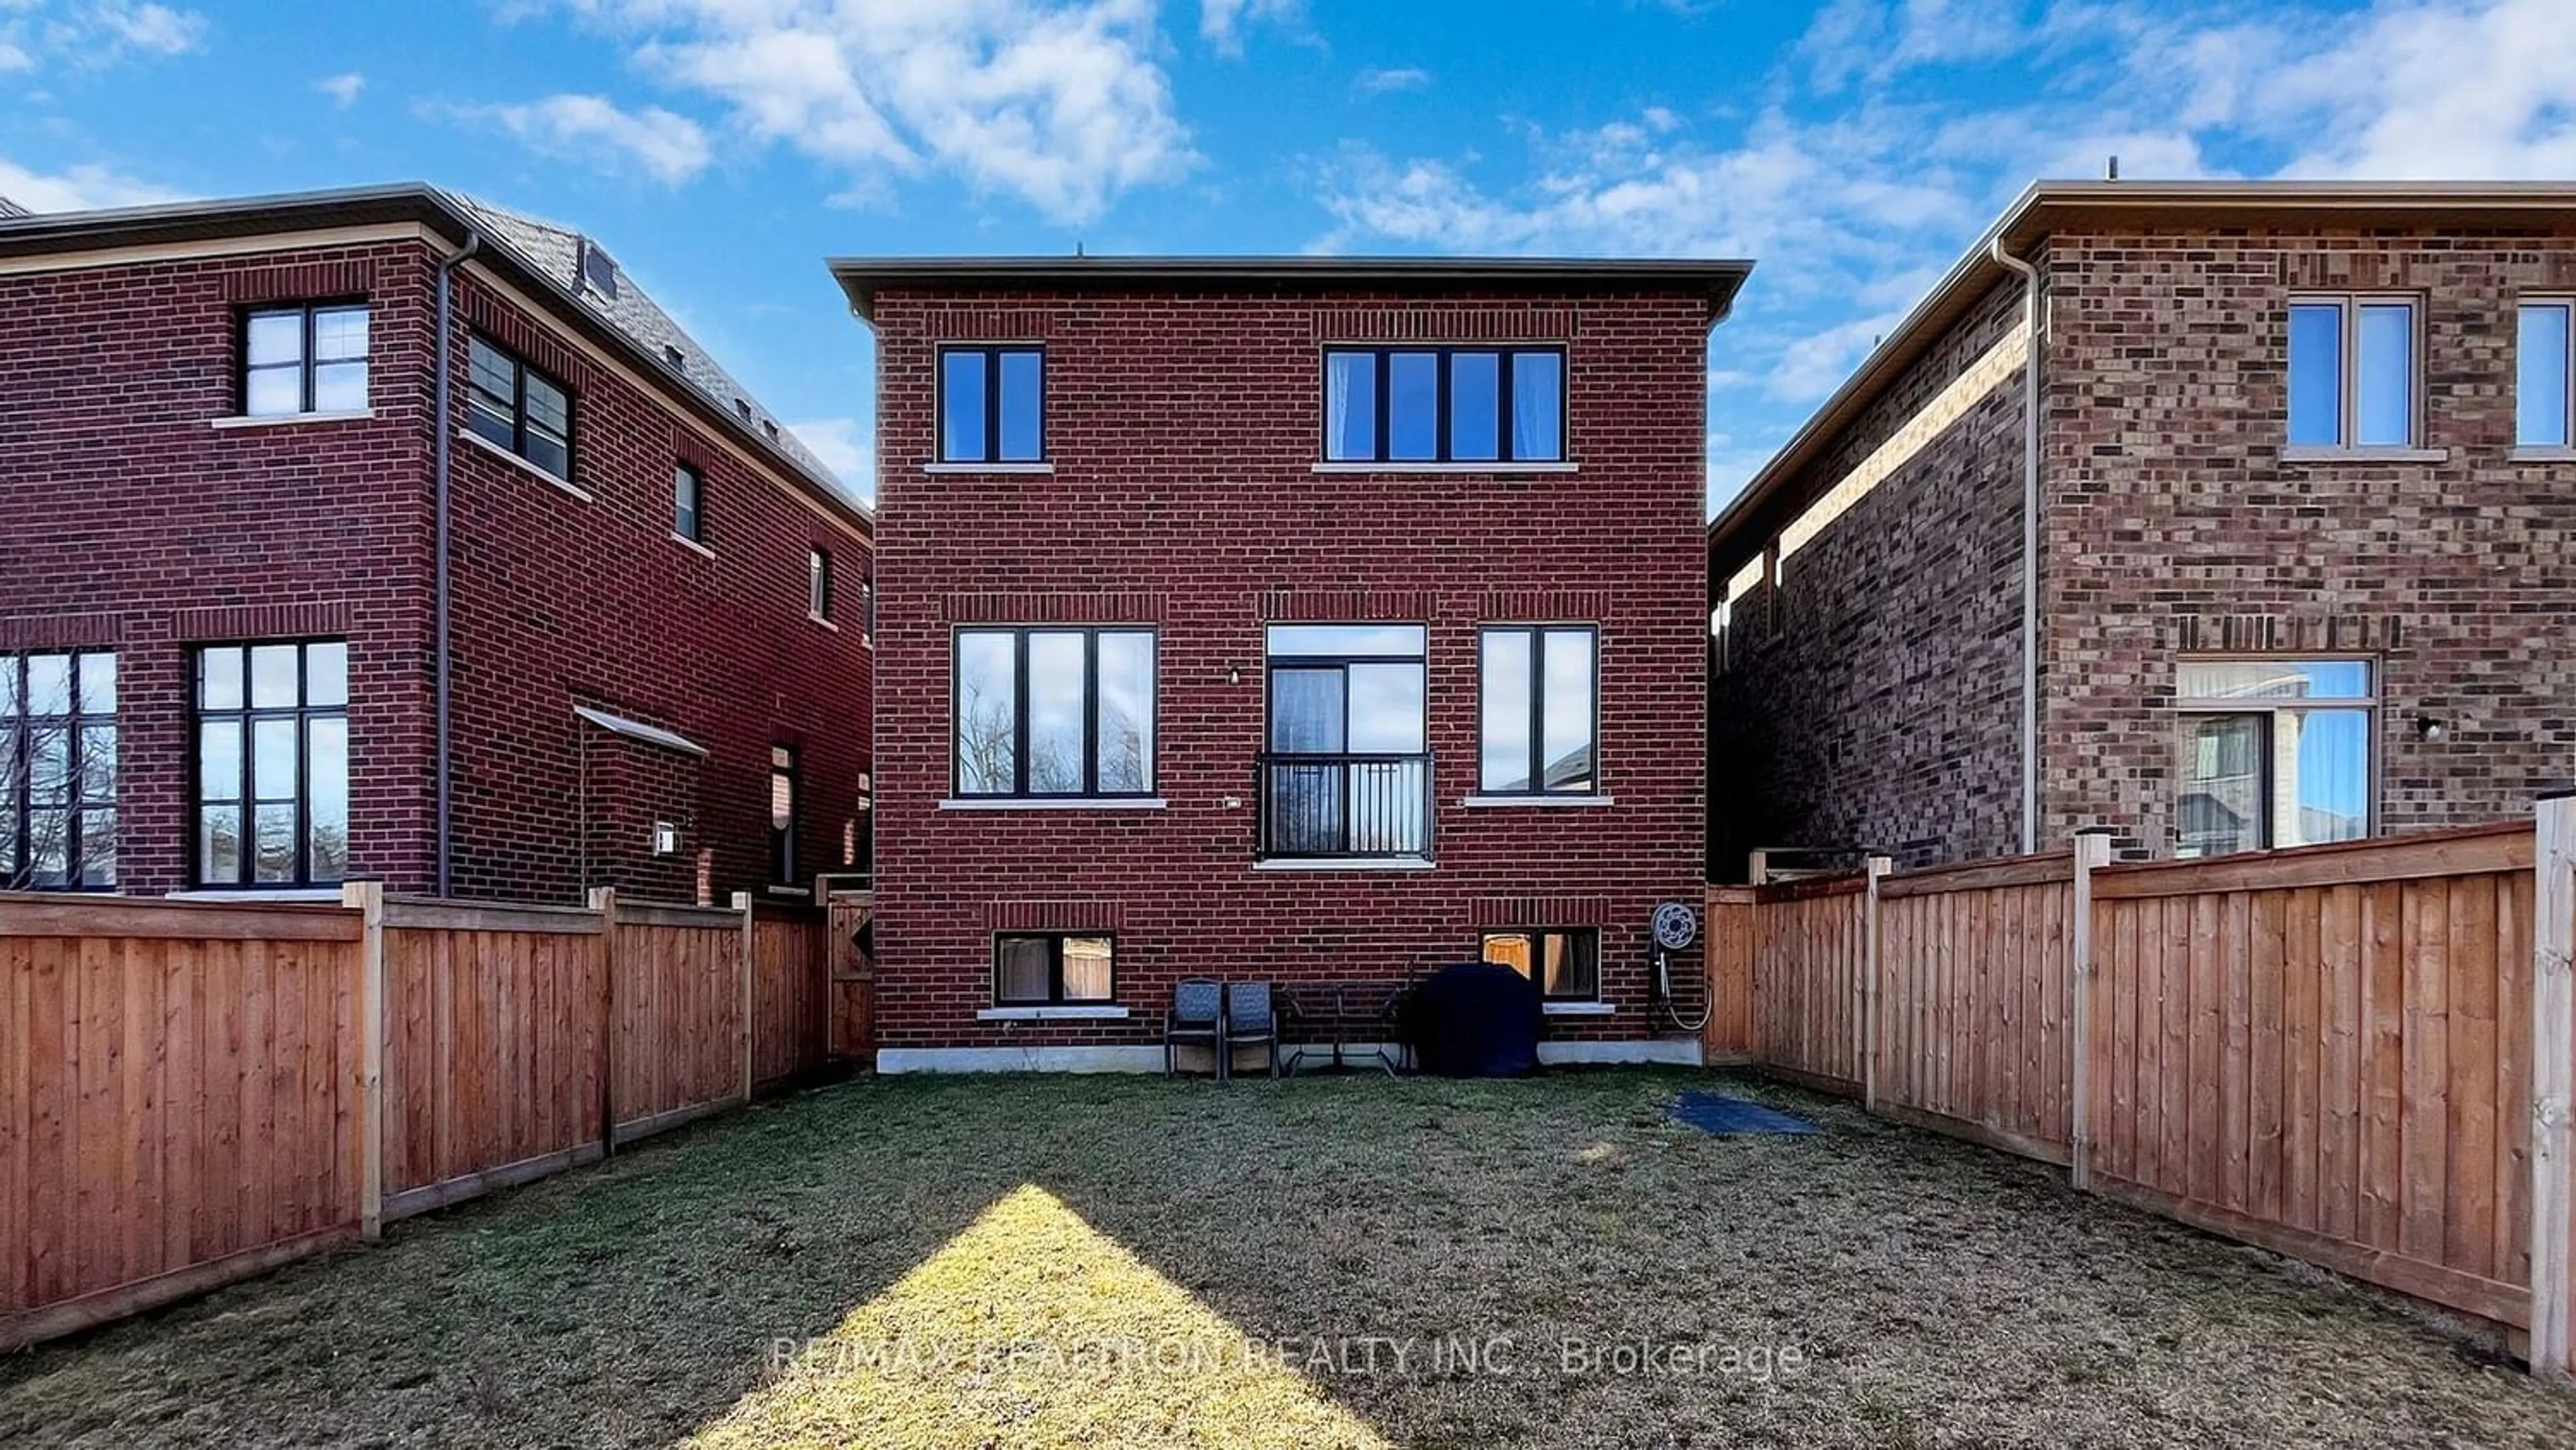 Home with brick exterior material for 127 Spofford Dr, Whitchurch-Stouffville Ontario L4A 4P7